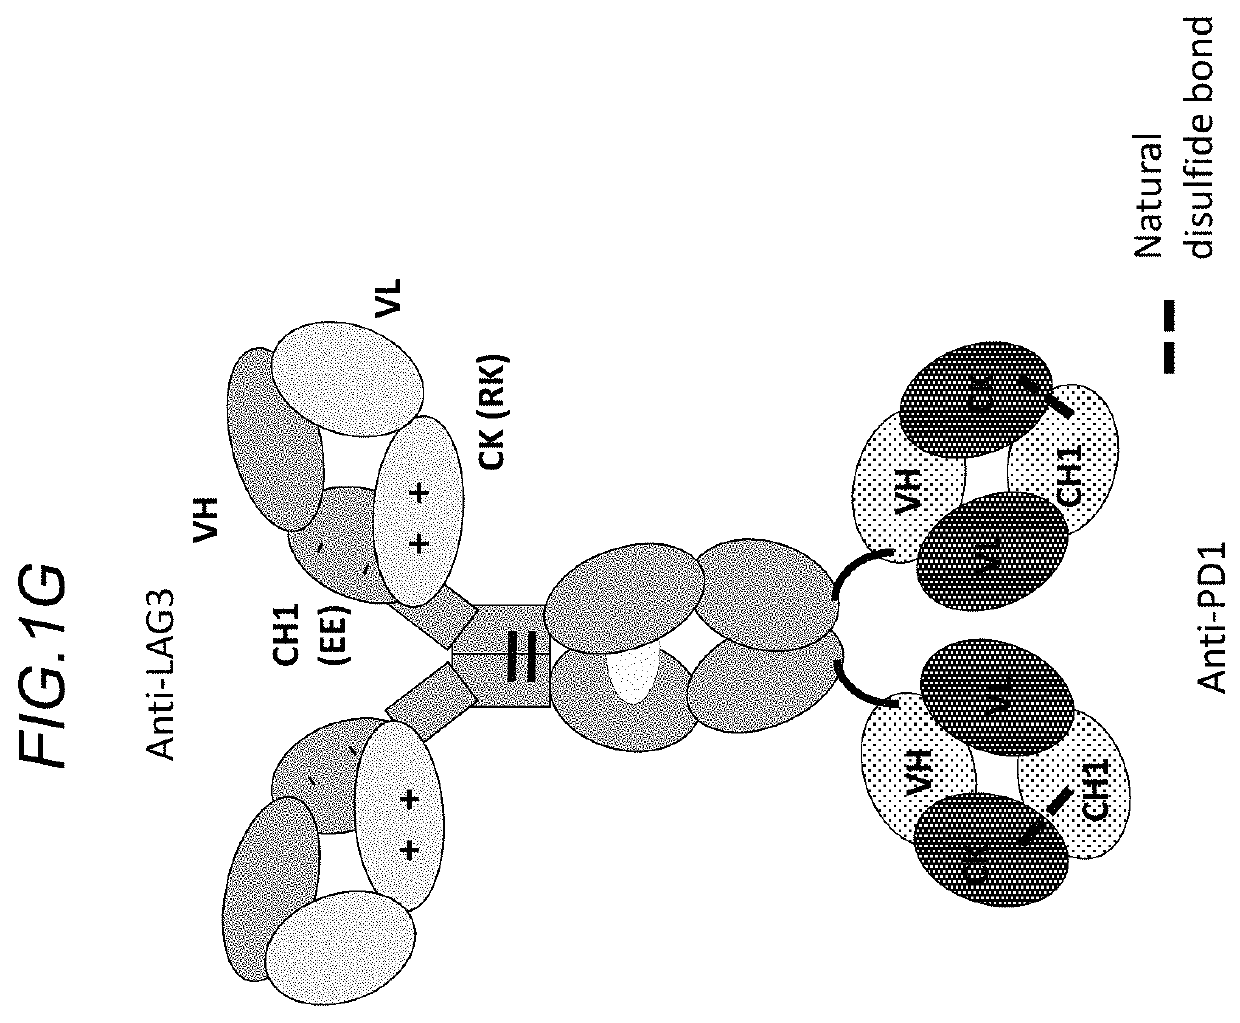 Bispecific antibodies specifically binding to PD1 and LAG3